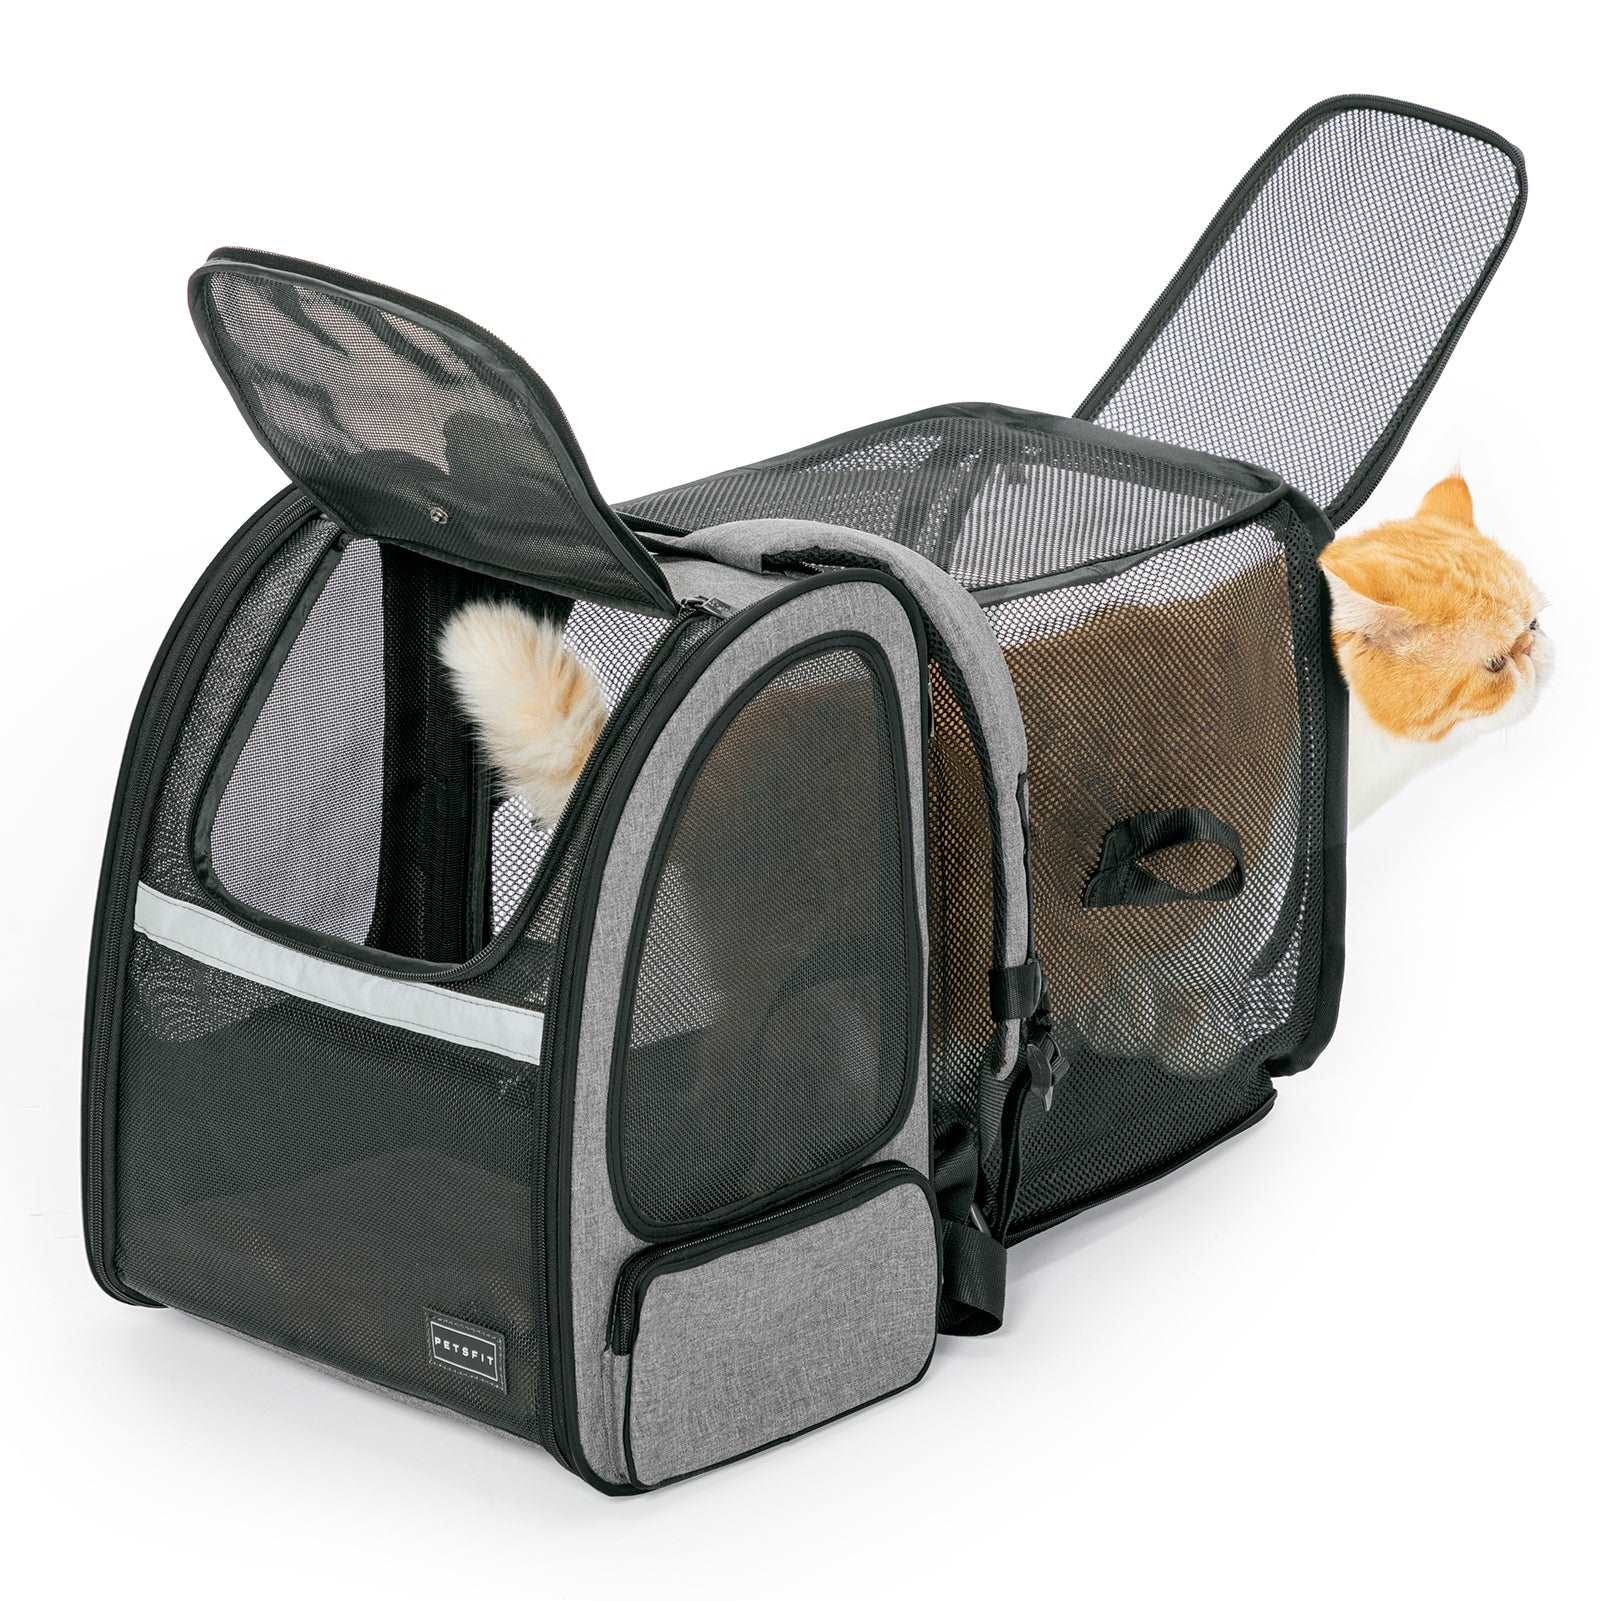 Petsfit-Dog-and-Cat-Backpack-Carrier-Expandable-with-Great-Ventilation-12